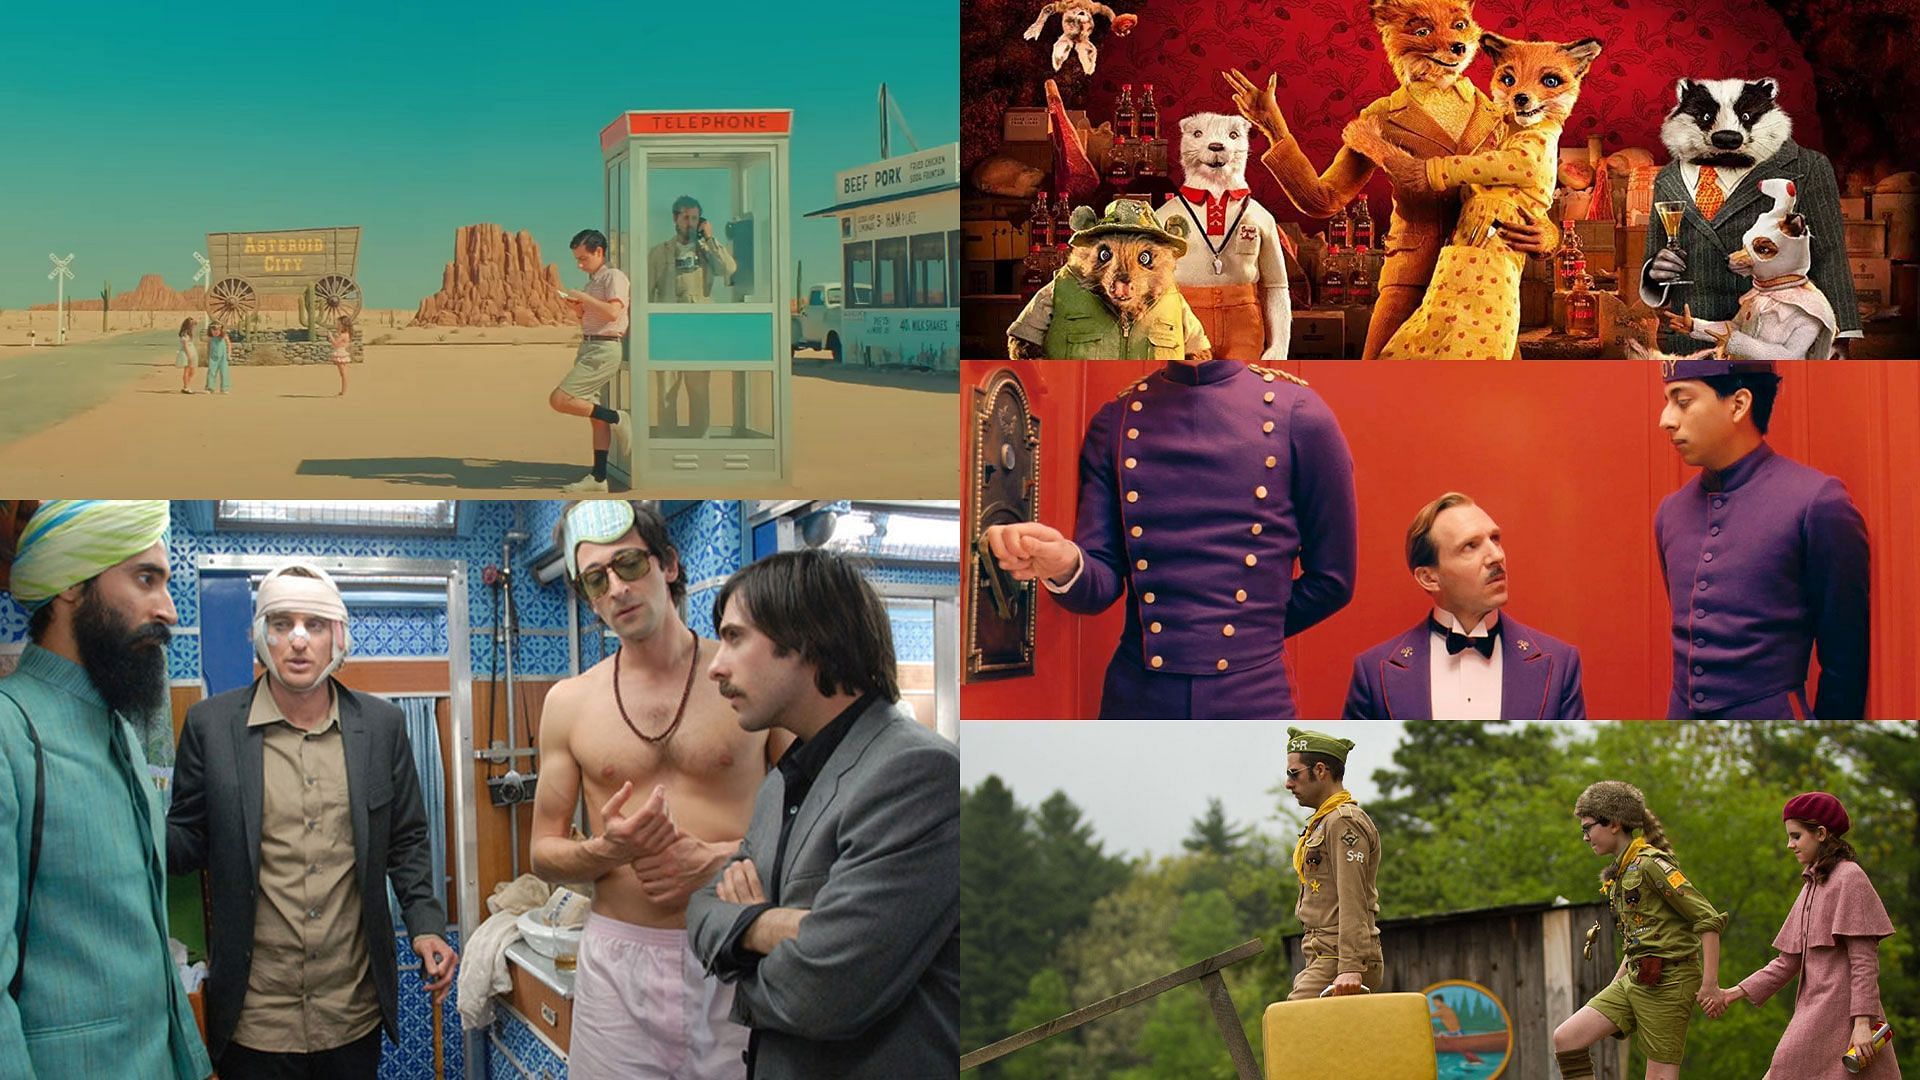 Collage of scenes from Wes Anderson